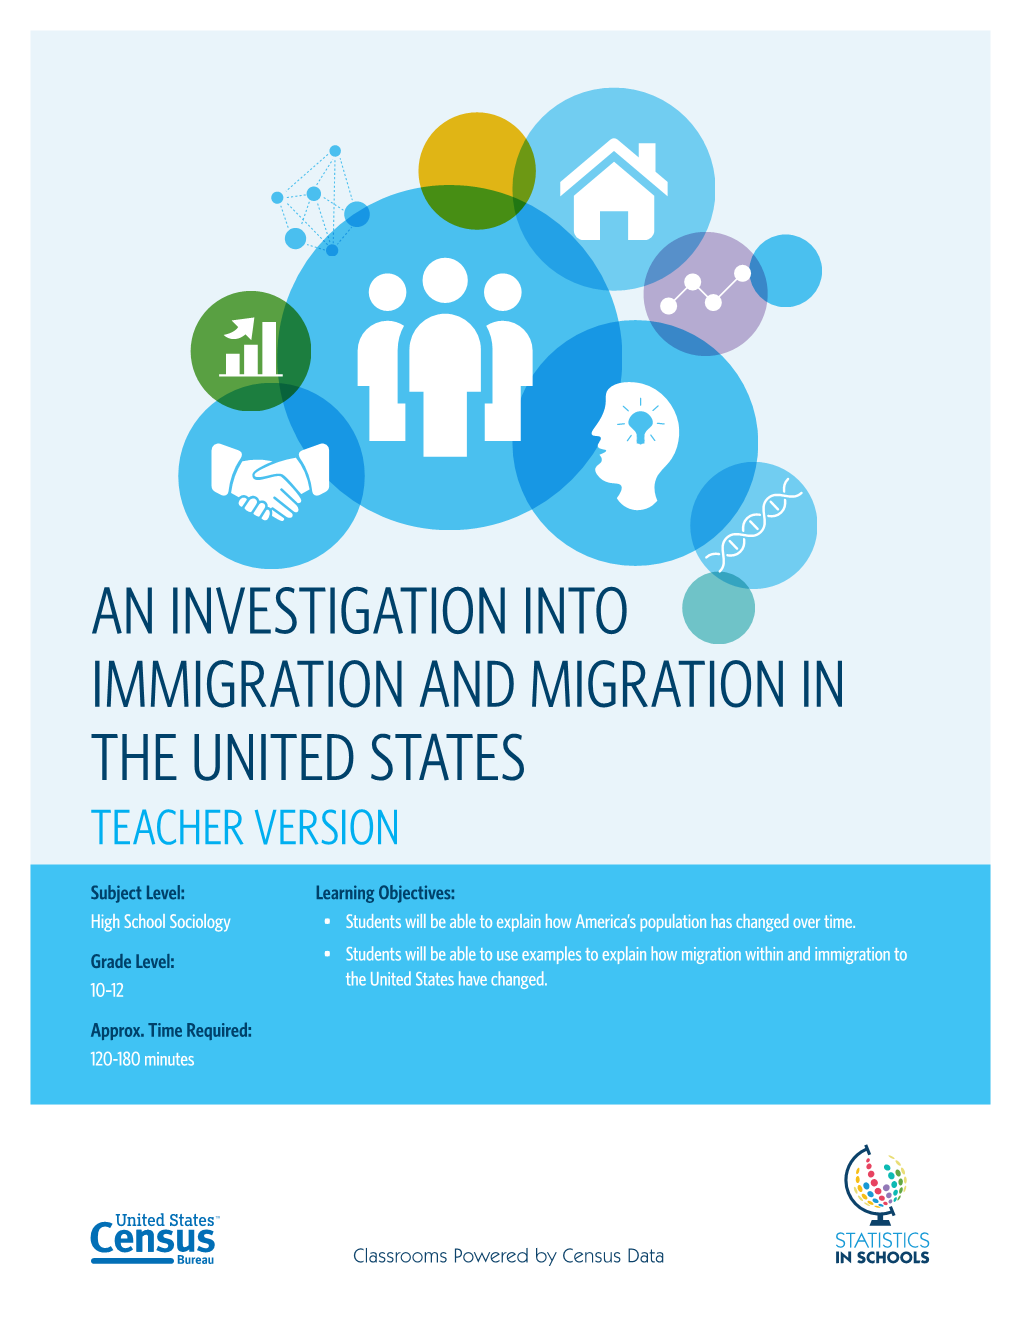 AN INVESTIGATION INTO IMMIGRATION and MIGRATION in the UNITED STATES (Teacher Version)